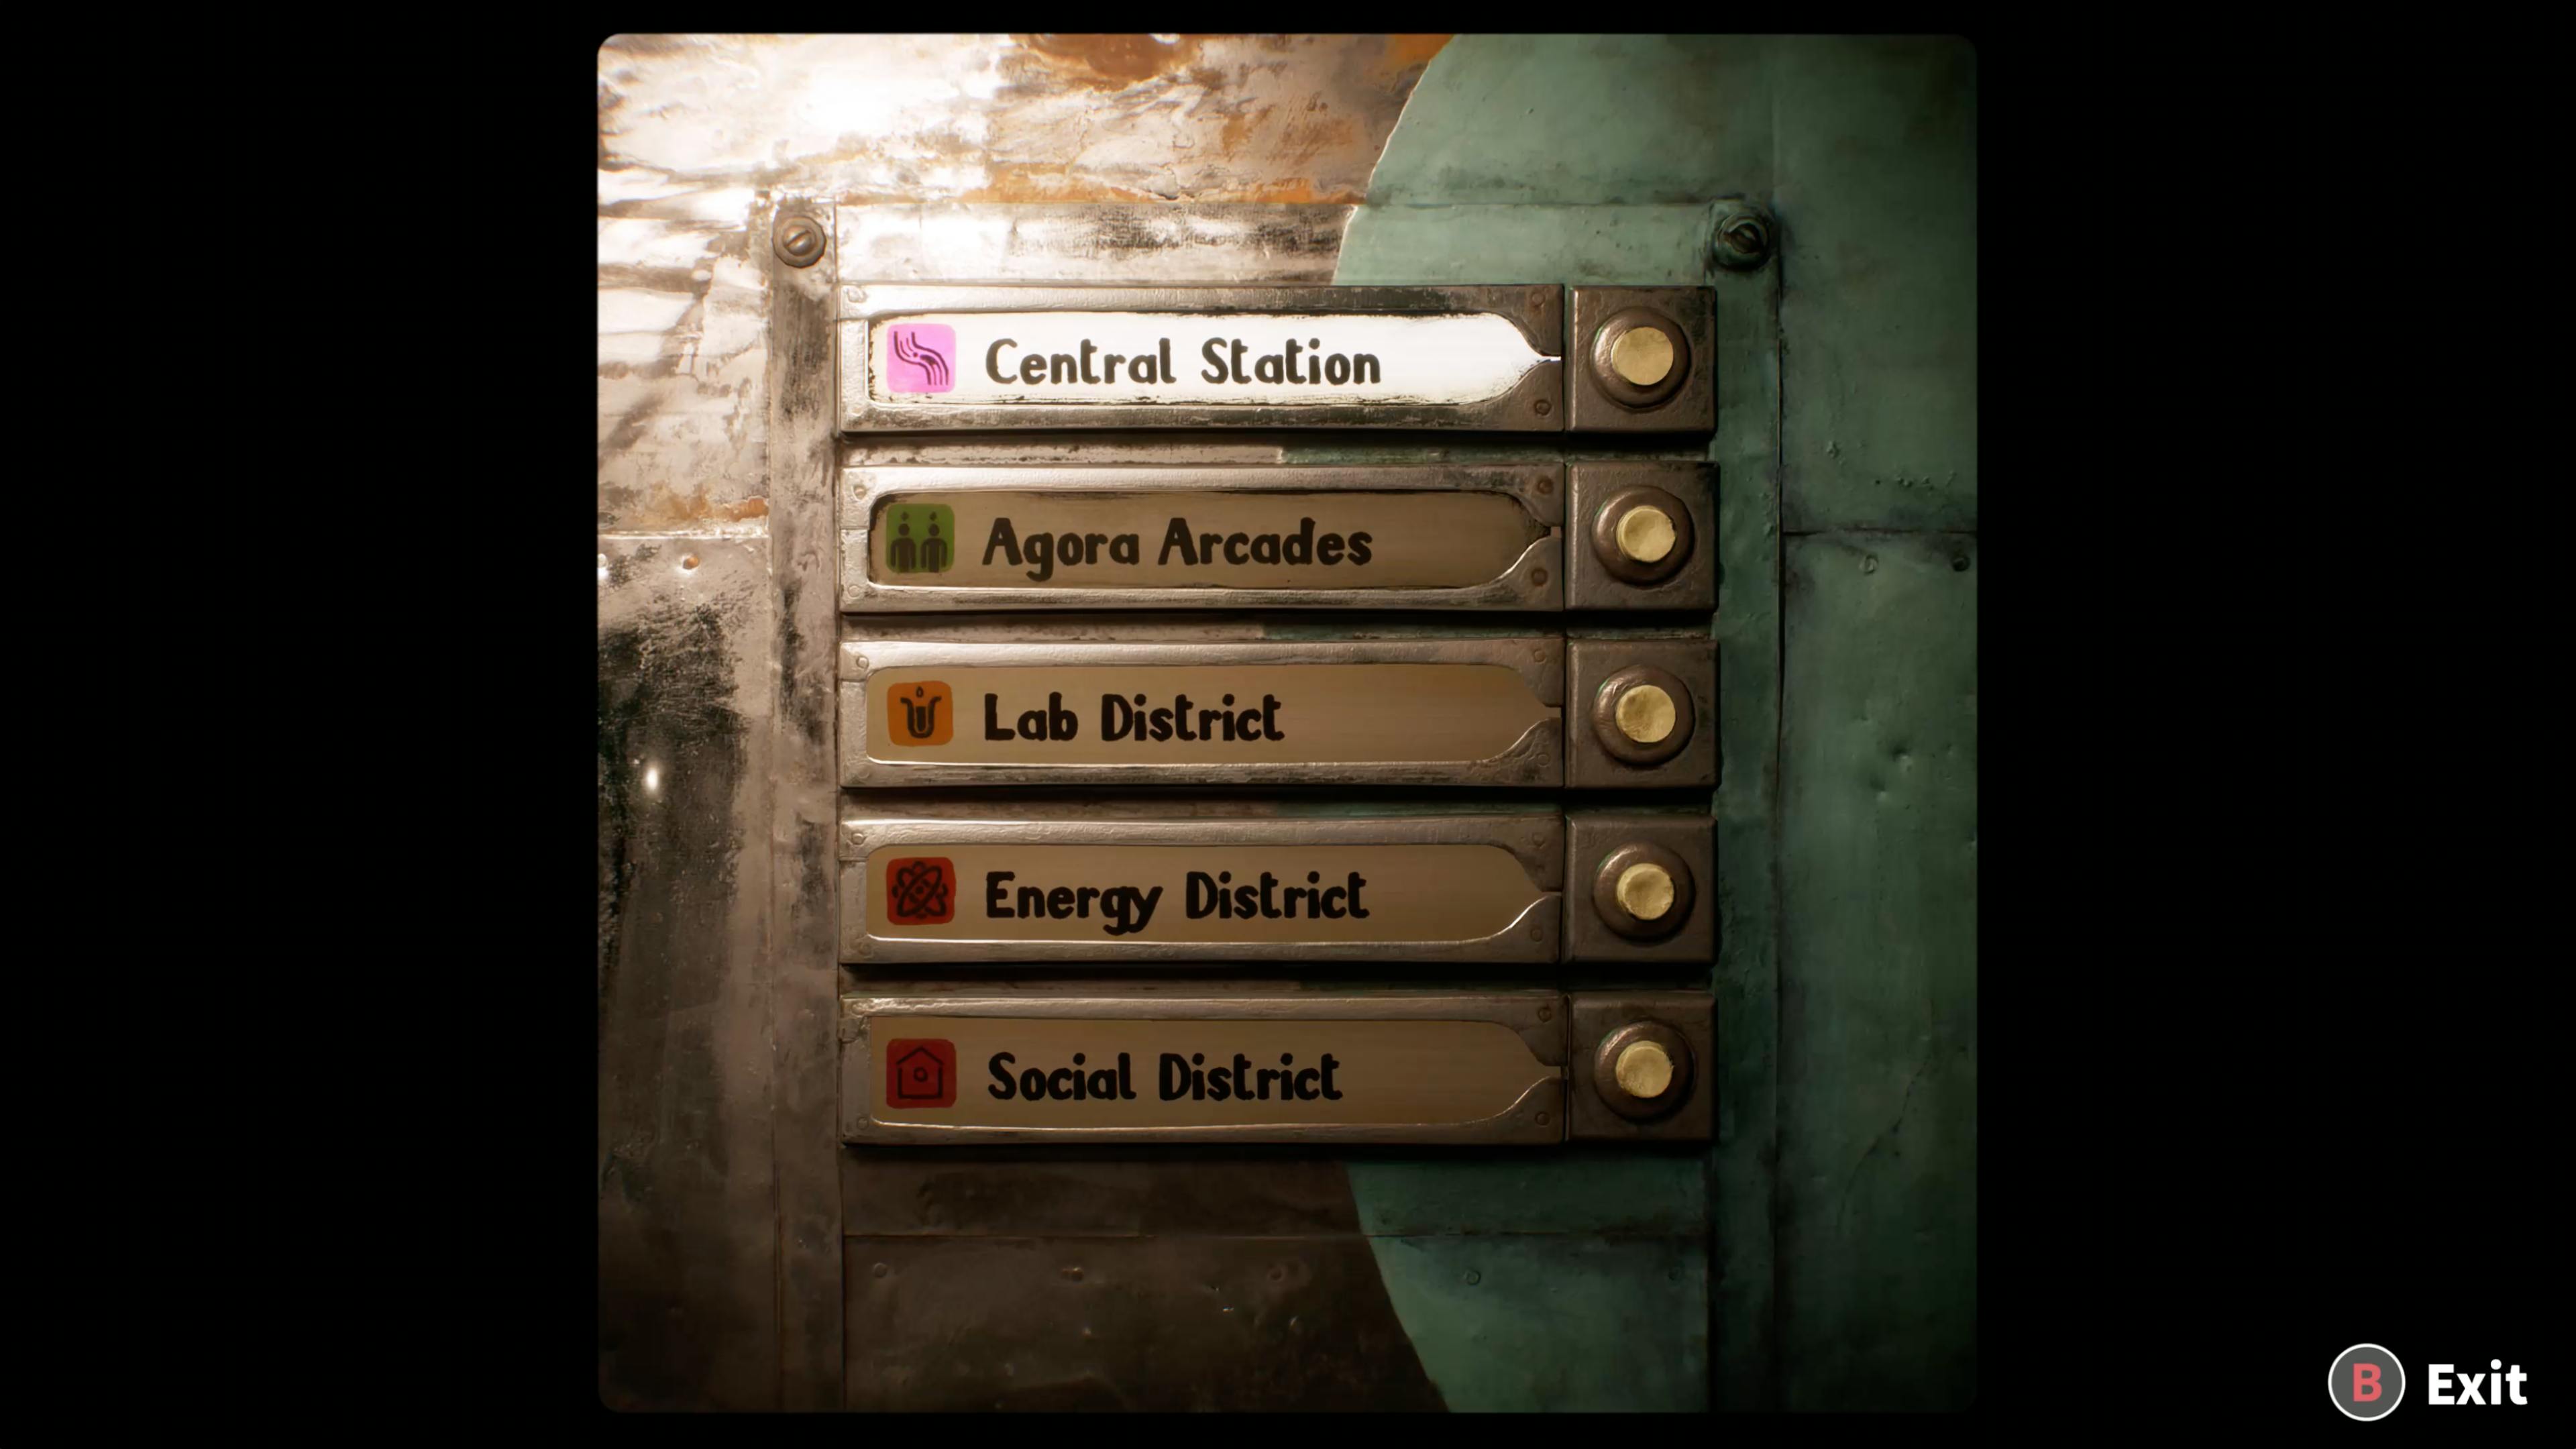 A set of destinations you can select. Each has their name and then a button next to it. Names are Central Station, Agora Arcades, Lab District, Energy District, Social District.